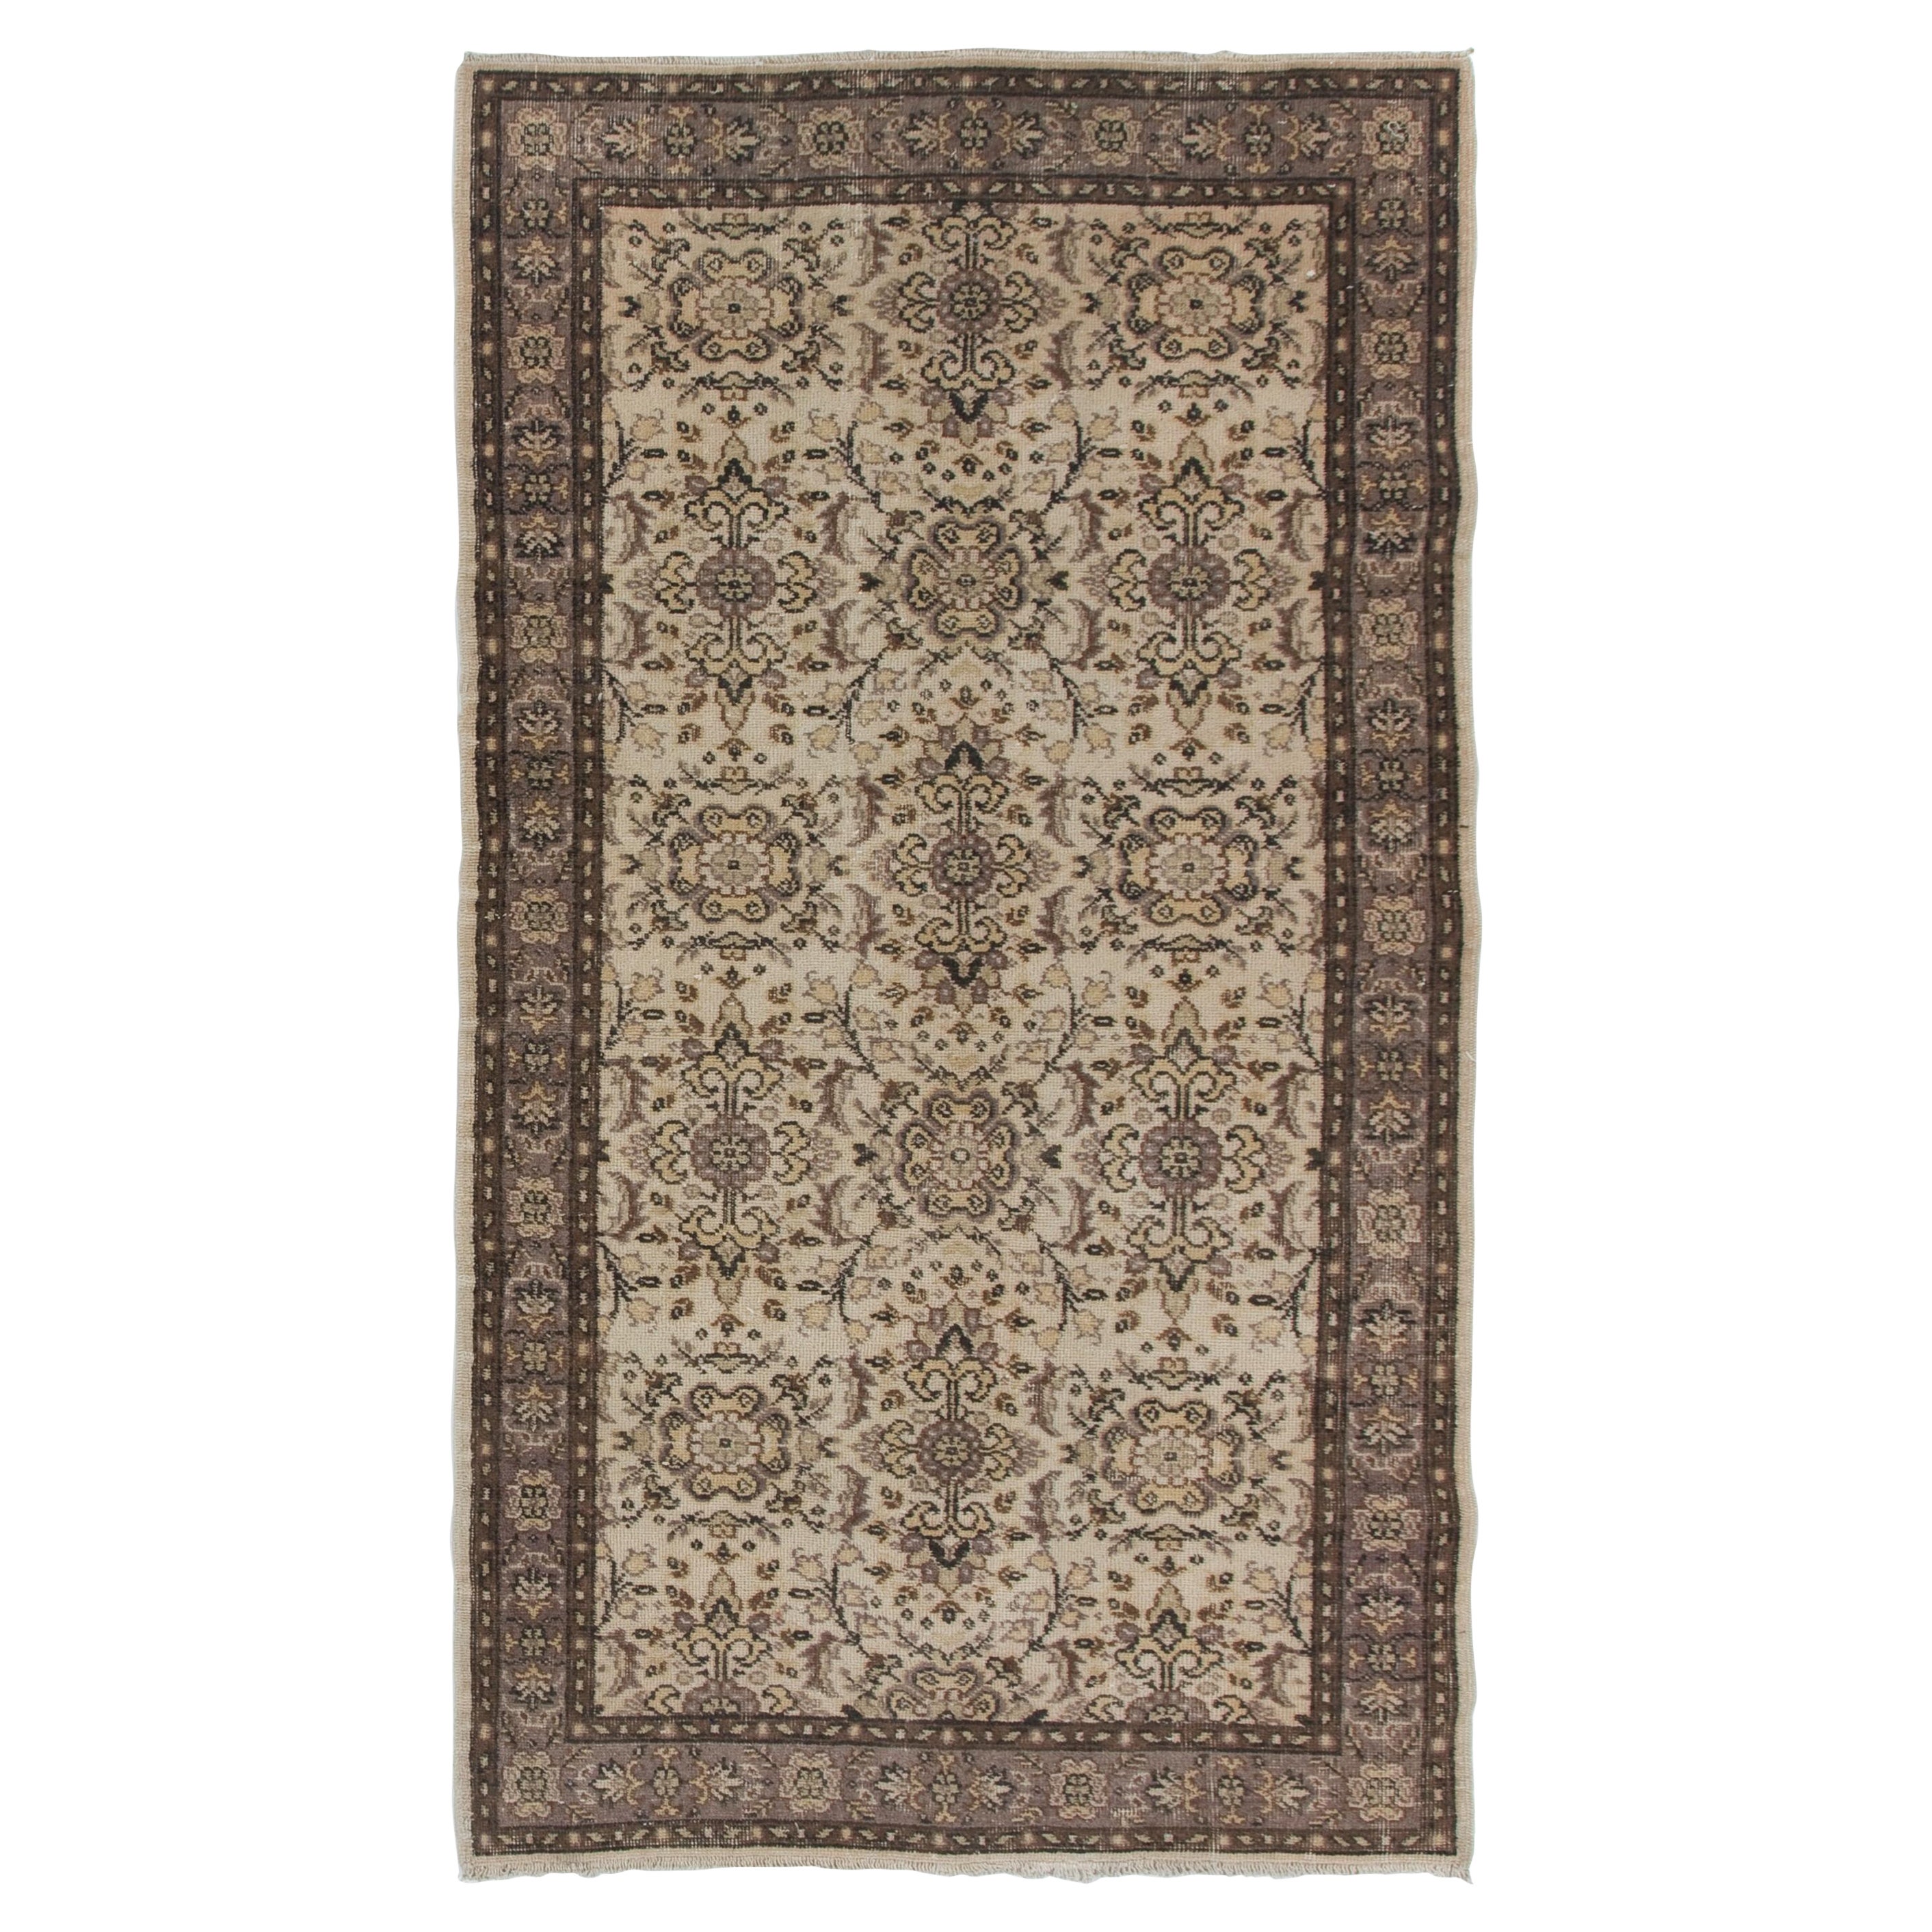 4x7 ft Handmade Mid-Century Turkish Oushak Carpet with All-Over Floral Design For Sale